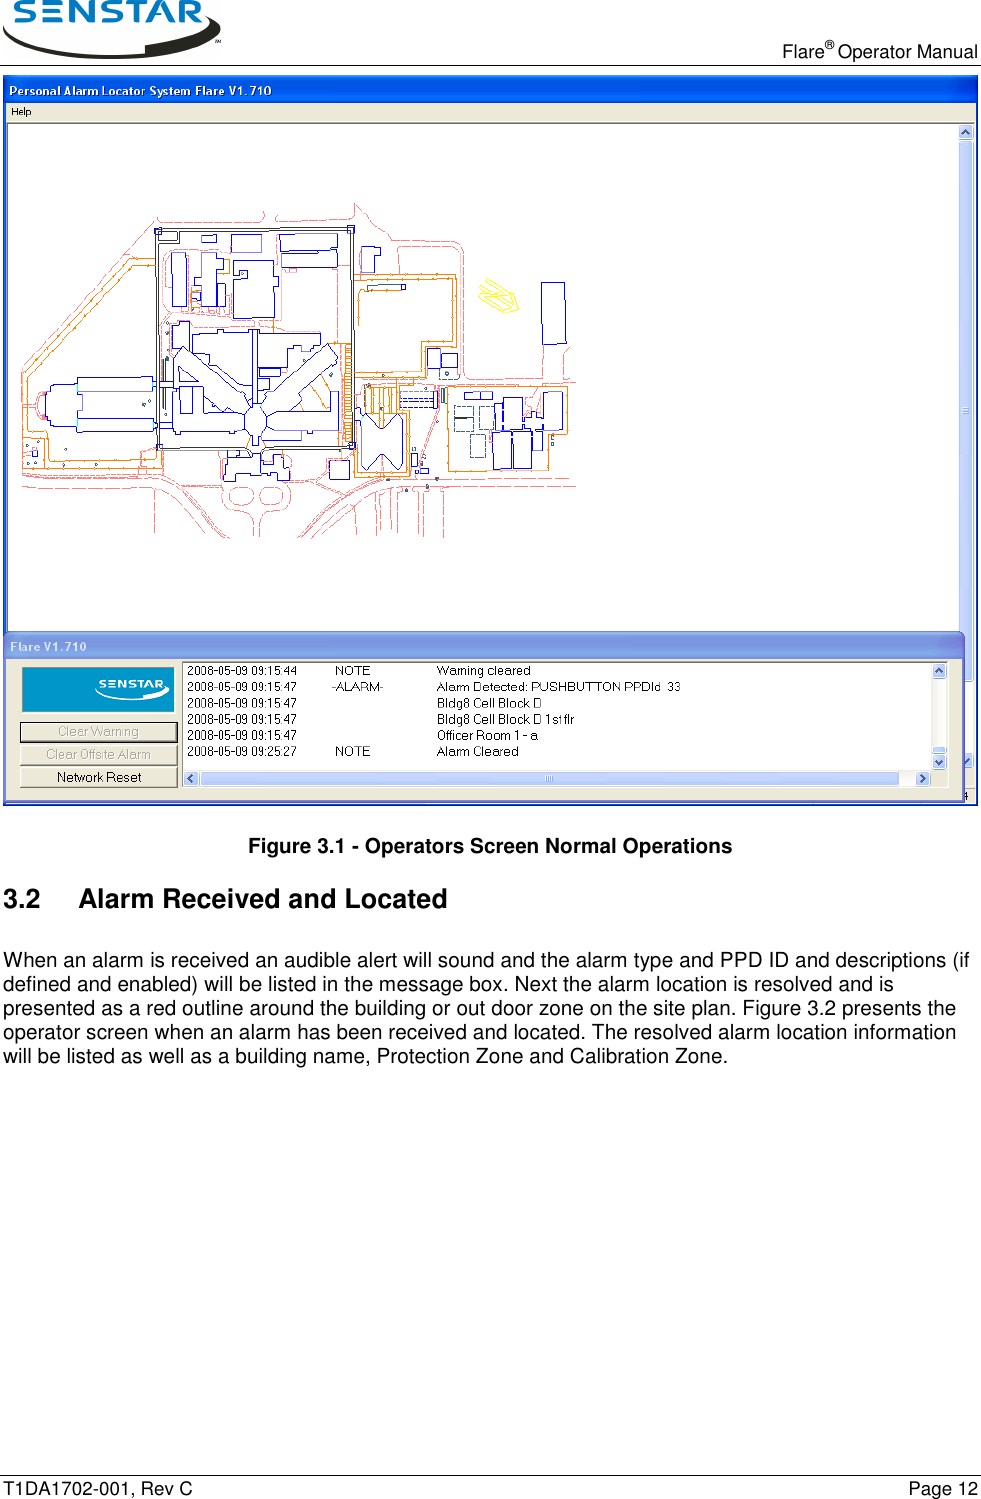   Flare® Operator Manual T1DA1702-001, Rev C    Page 12   Figure 3.1 - Operators Screen Normal Operations 3.2  Alarm Received and Located When an alarm is received an audible alert will sound and the alarm type and PPD ID and descriptions (if defined and enabled) will be listed in the message box. Next the alarm location is resolved and is presented as a red outline around the building or out door zone on the site plan. Figure 3.2 presents the operator screen when an alarm has been received and located. The resolved alarm location information will be listed as well as a building name, Protection Zone and Calibration Zone. 